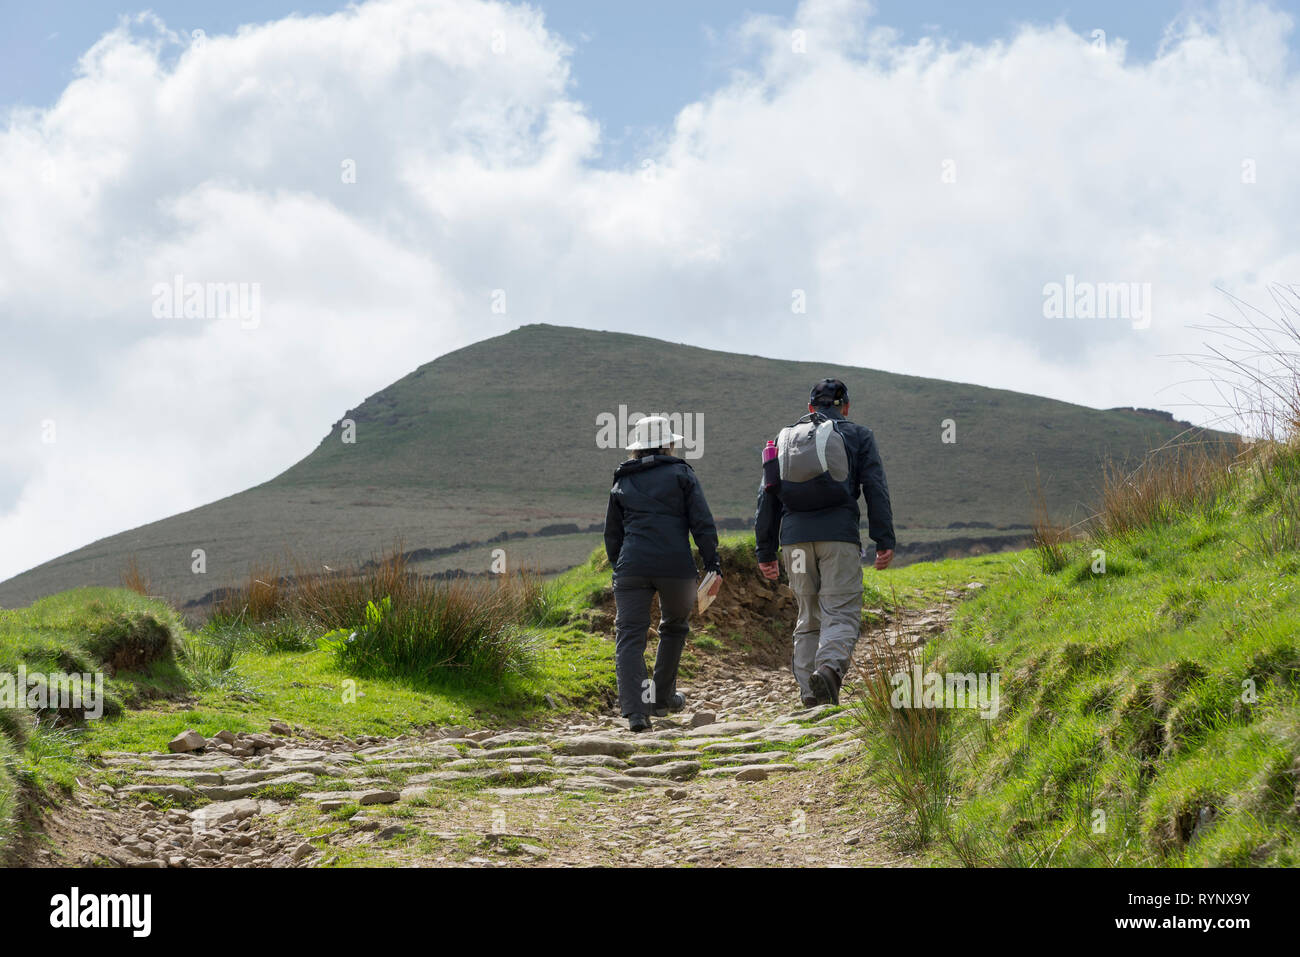 Couple hiking in the hills near Hayfield, Derbyshire in the Peak District. Mount Famine in the background. Stock Photo